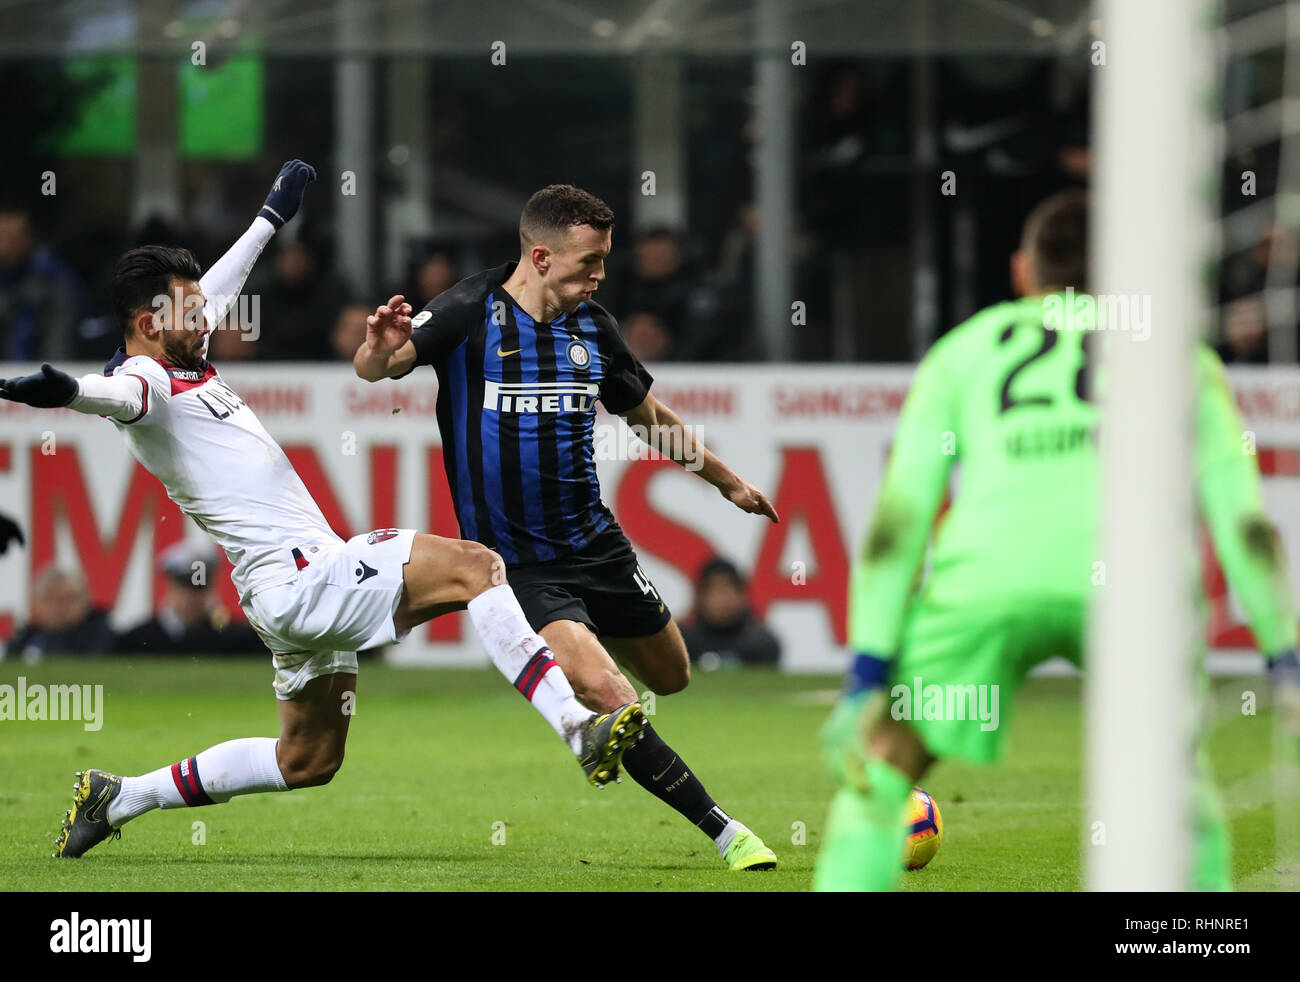 Milan. 3rd Feb, 2019. FC Inter's Ivan Perisic (C) vies with Bologna's Giancarlo Gonzalez (L) during the Serie A soccer match between FC Inter and Bologna, in Milan, Italy, Feb.3, 2019. Bologna won 1-0. Credit: Cheng Tingting/Xinhua/Alamy Live News Stock Photo